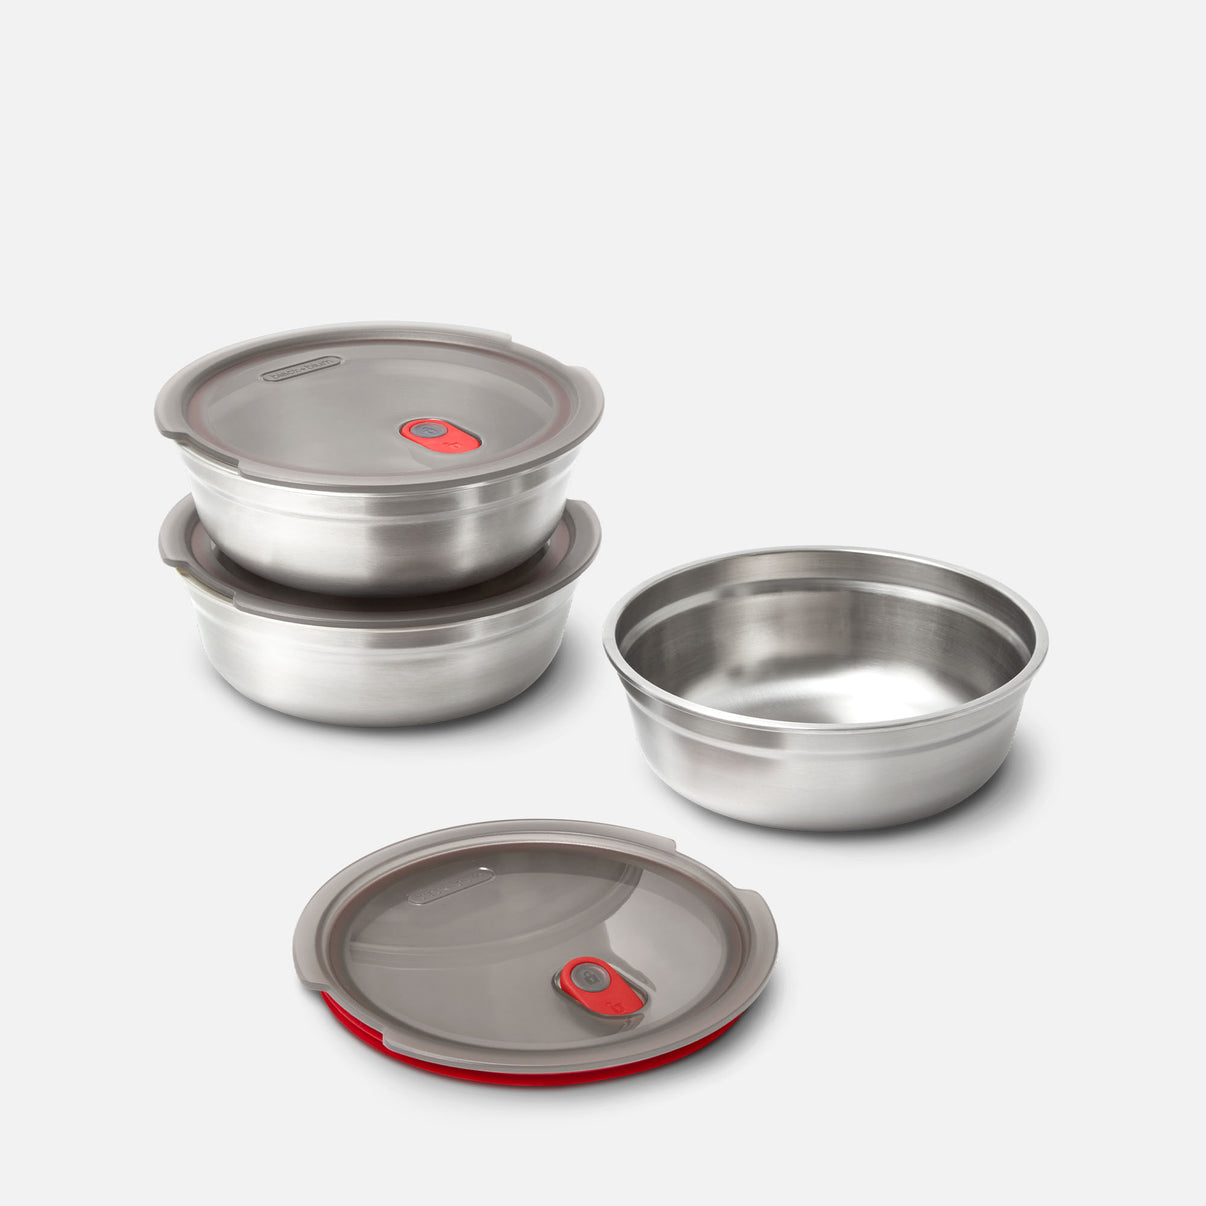 worldstainless - Stainless steel reusable and microwave safe food